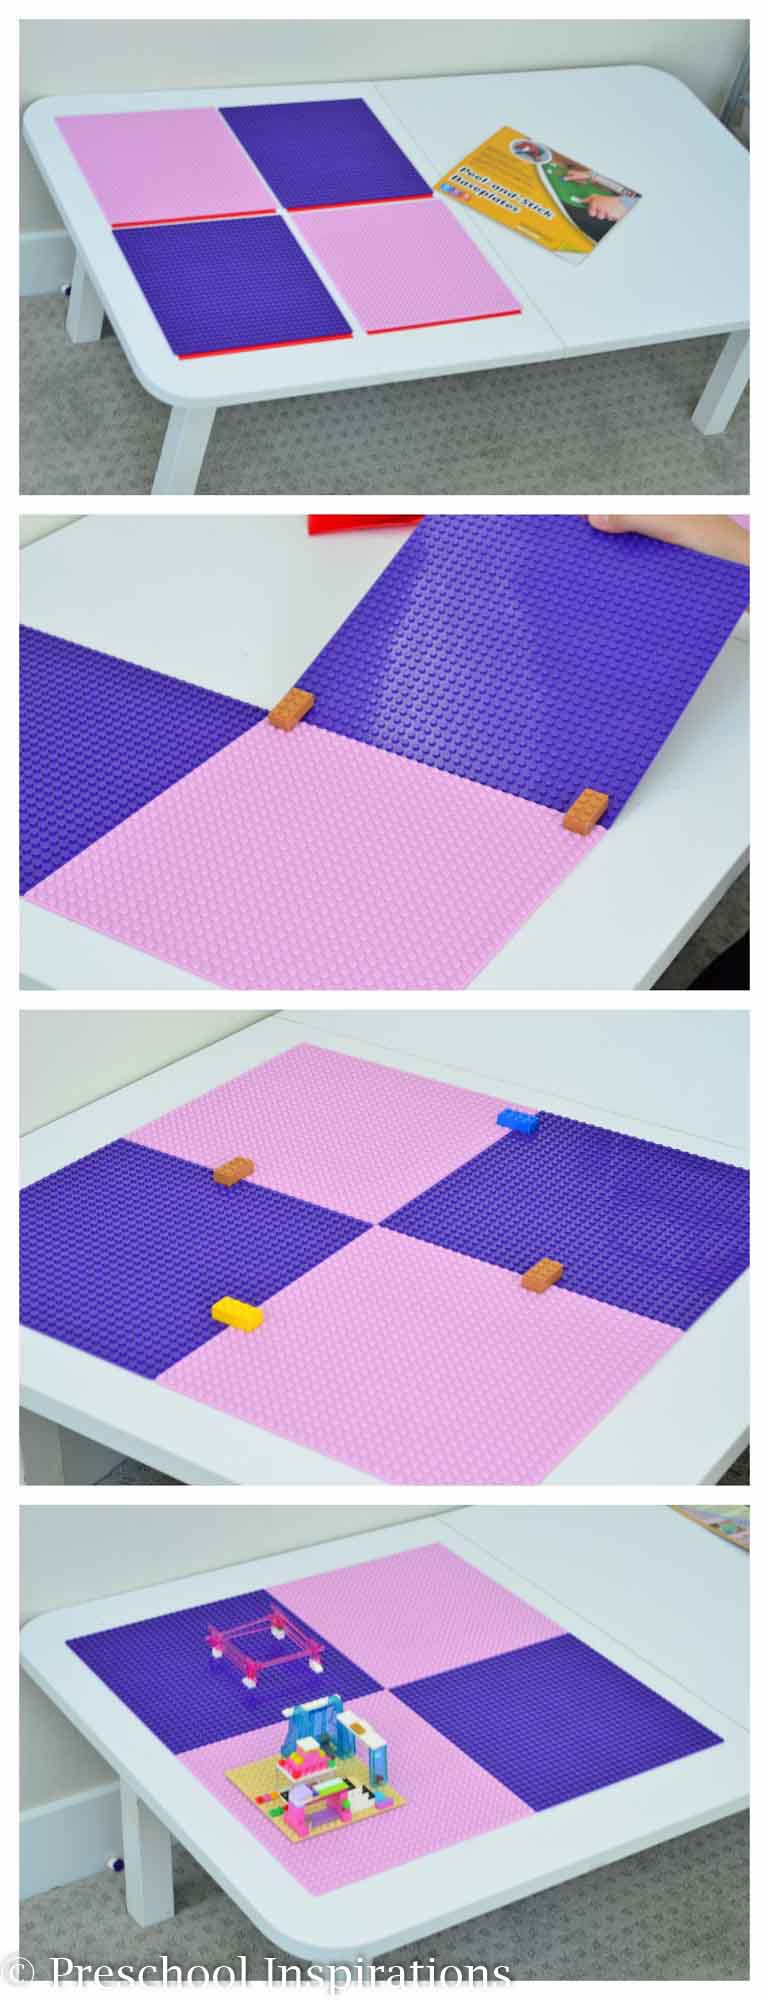 Make a Lego table with this easy Lego baseplates that peel and stick like a giant sticker. This is perfect for a girl's dream Lego table!